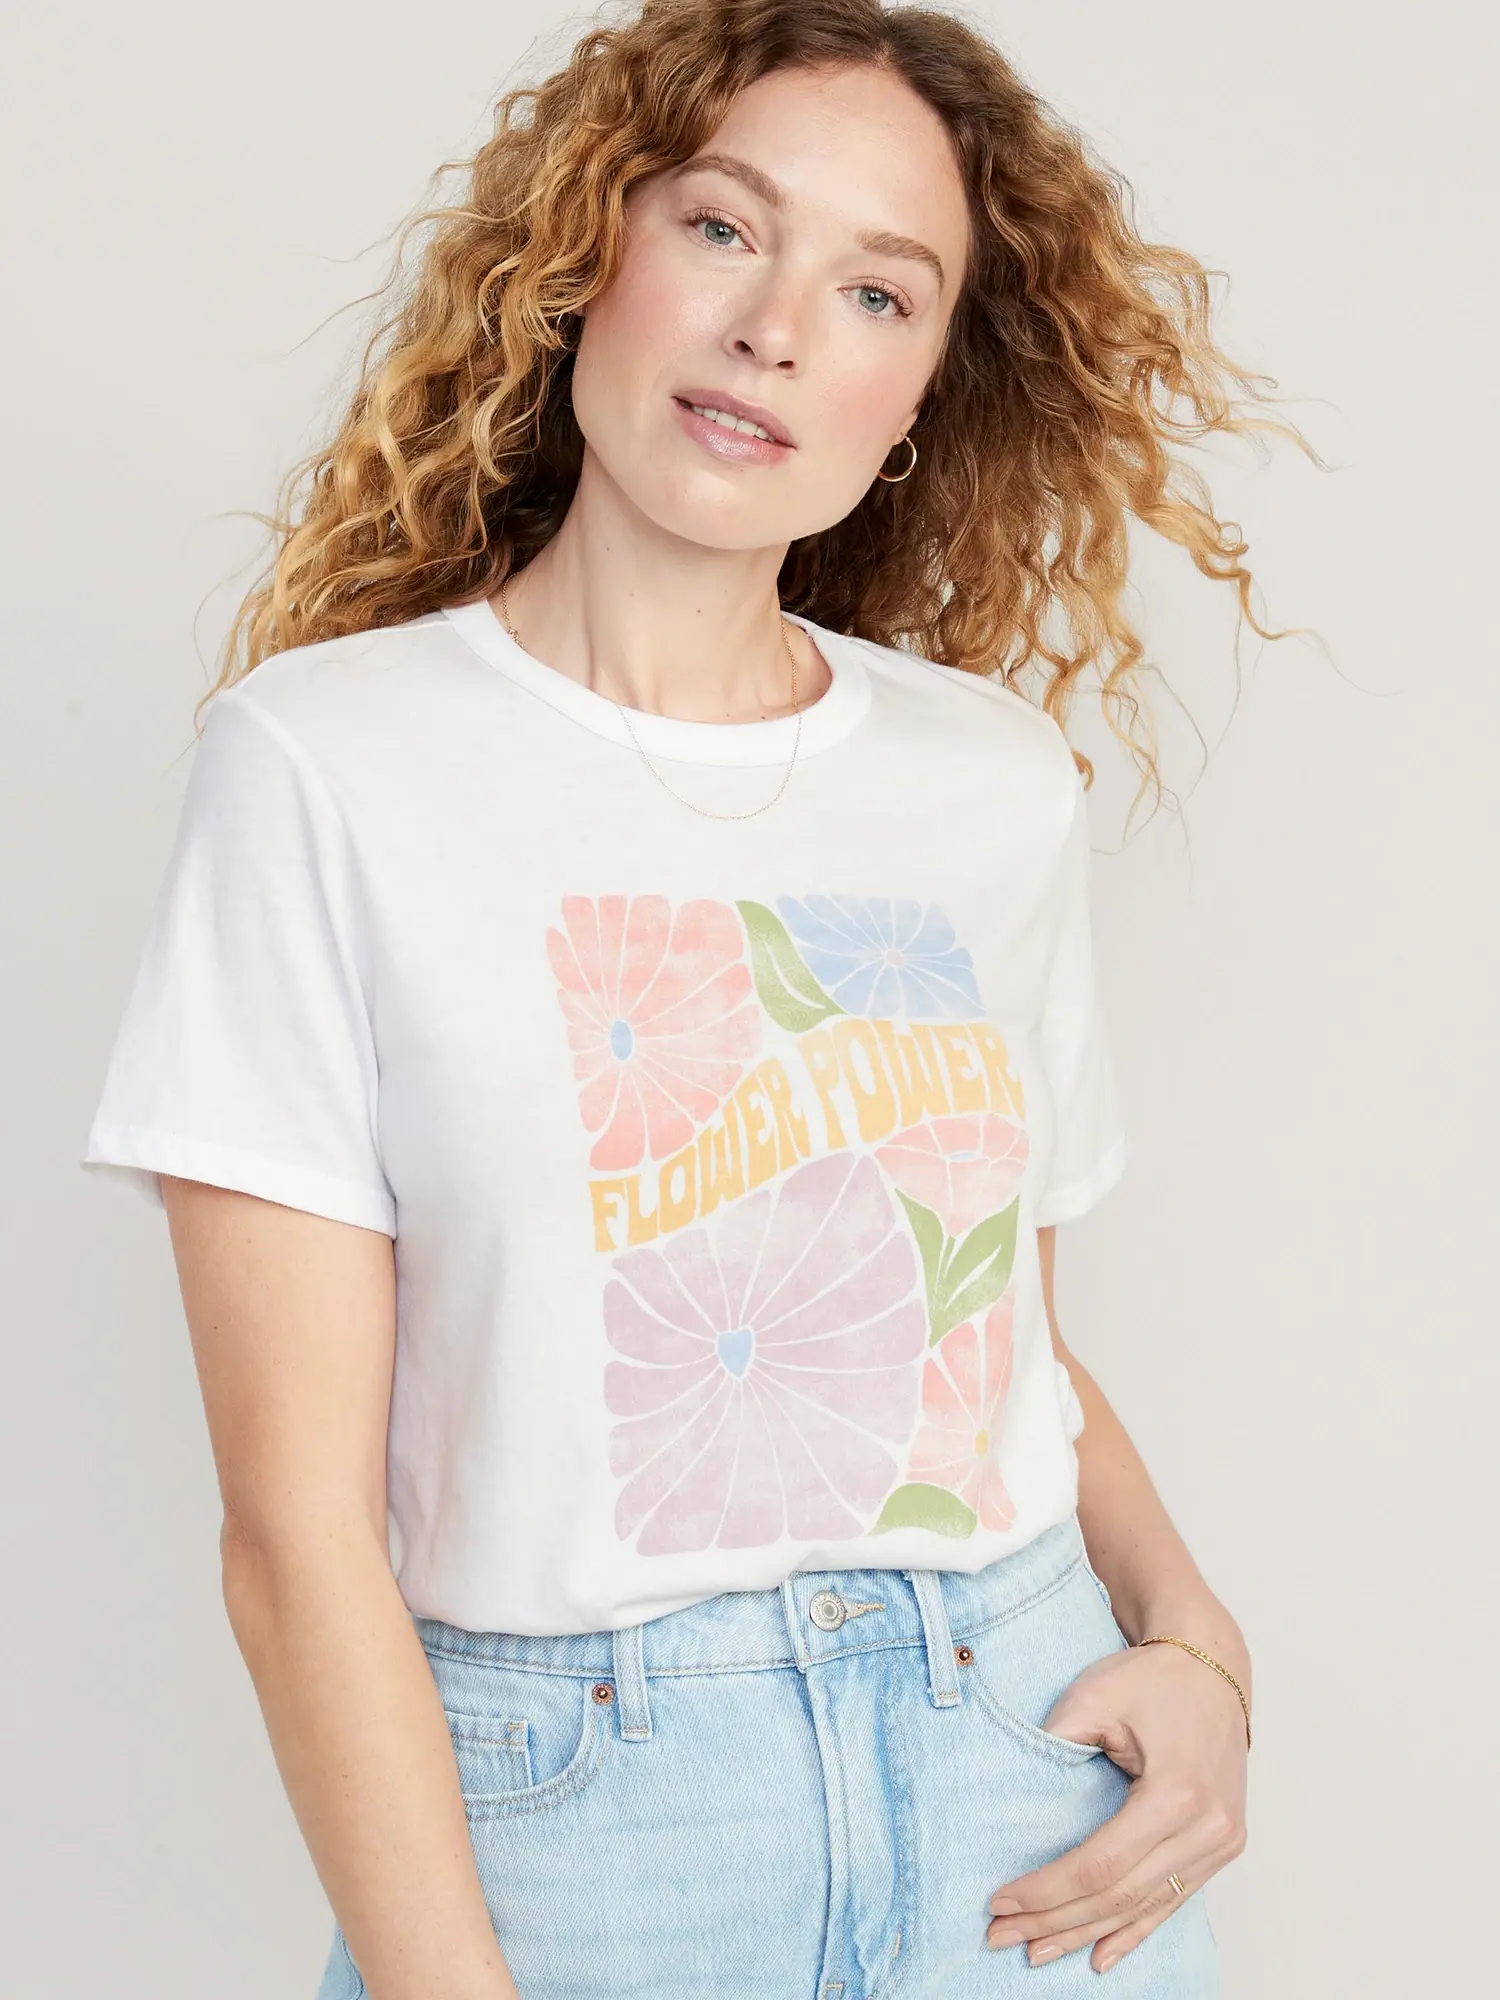 Old Navy EveryWear Graphic T-Shirt for Women white. 1